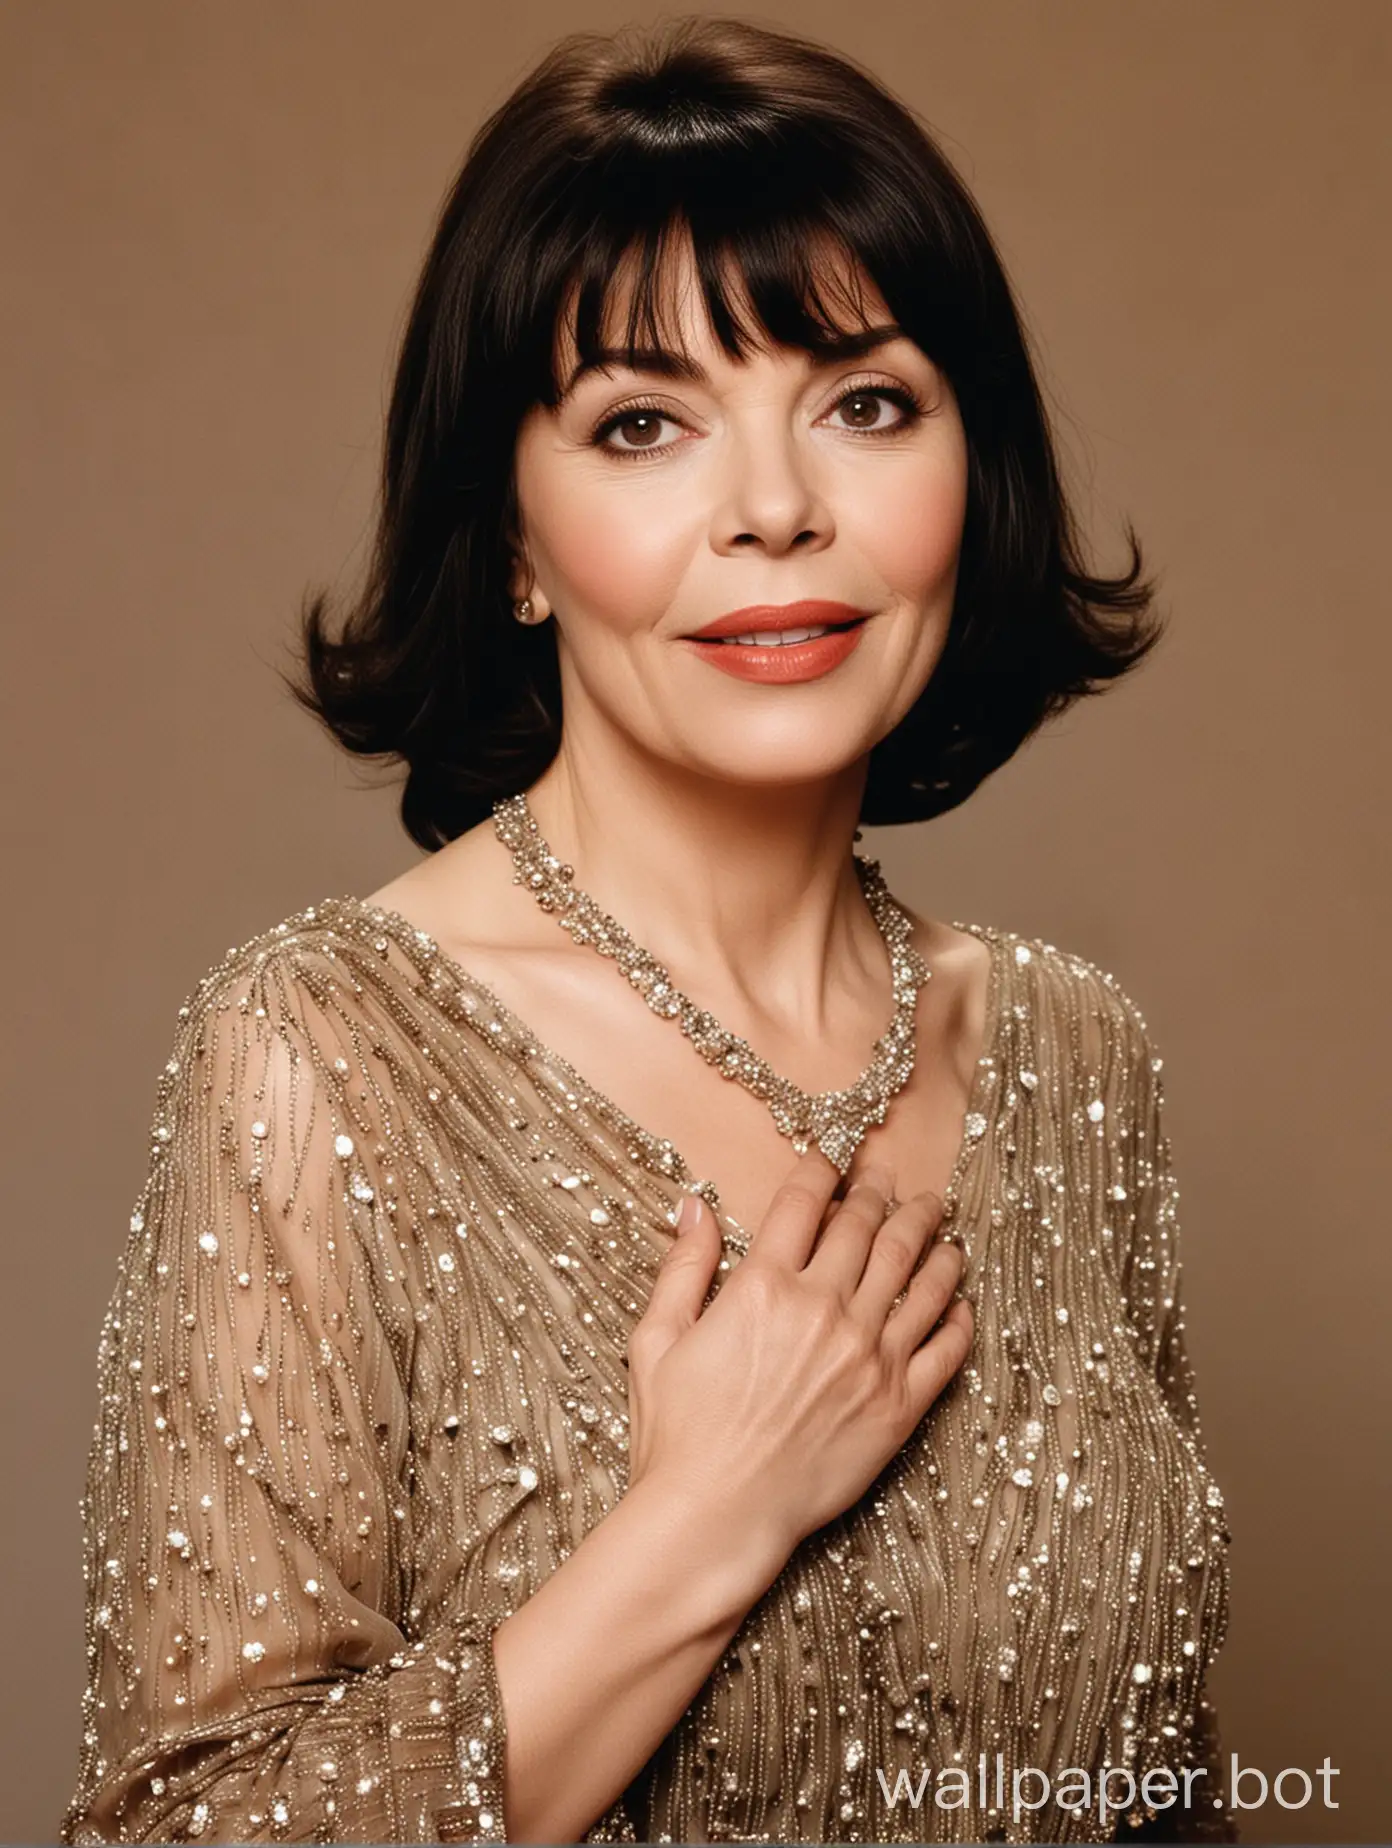 Mireille Mathieu is a magnificent singer on the stage of life under the dazzling rays of fame